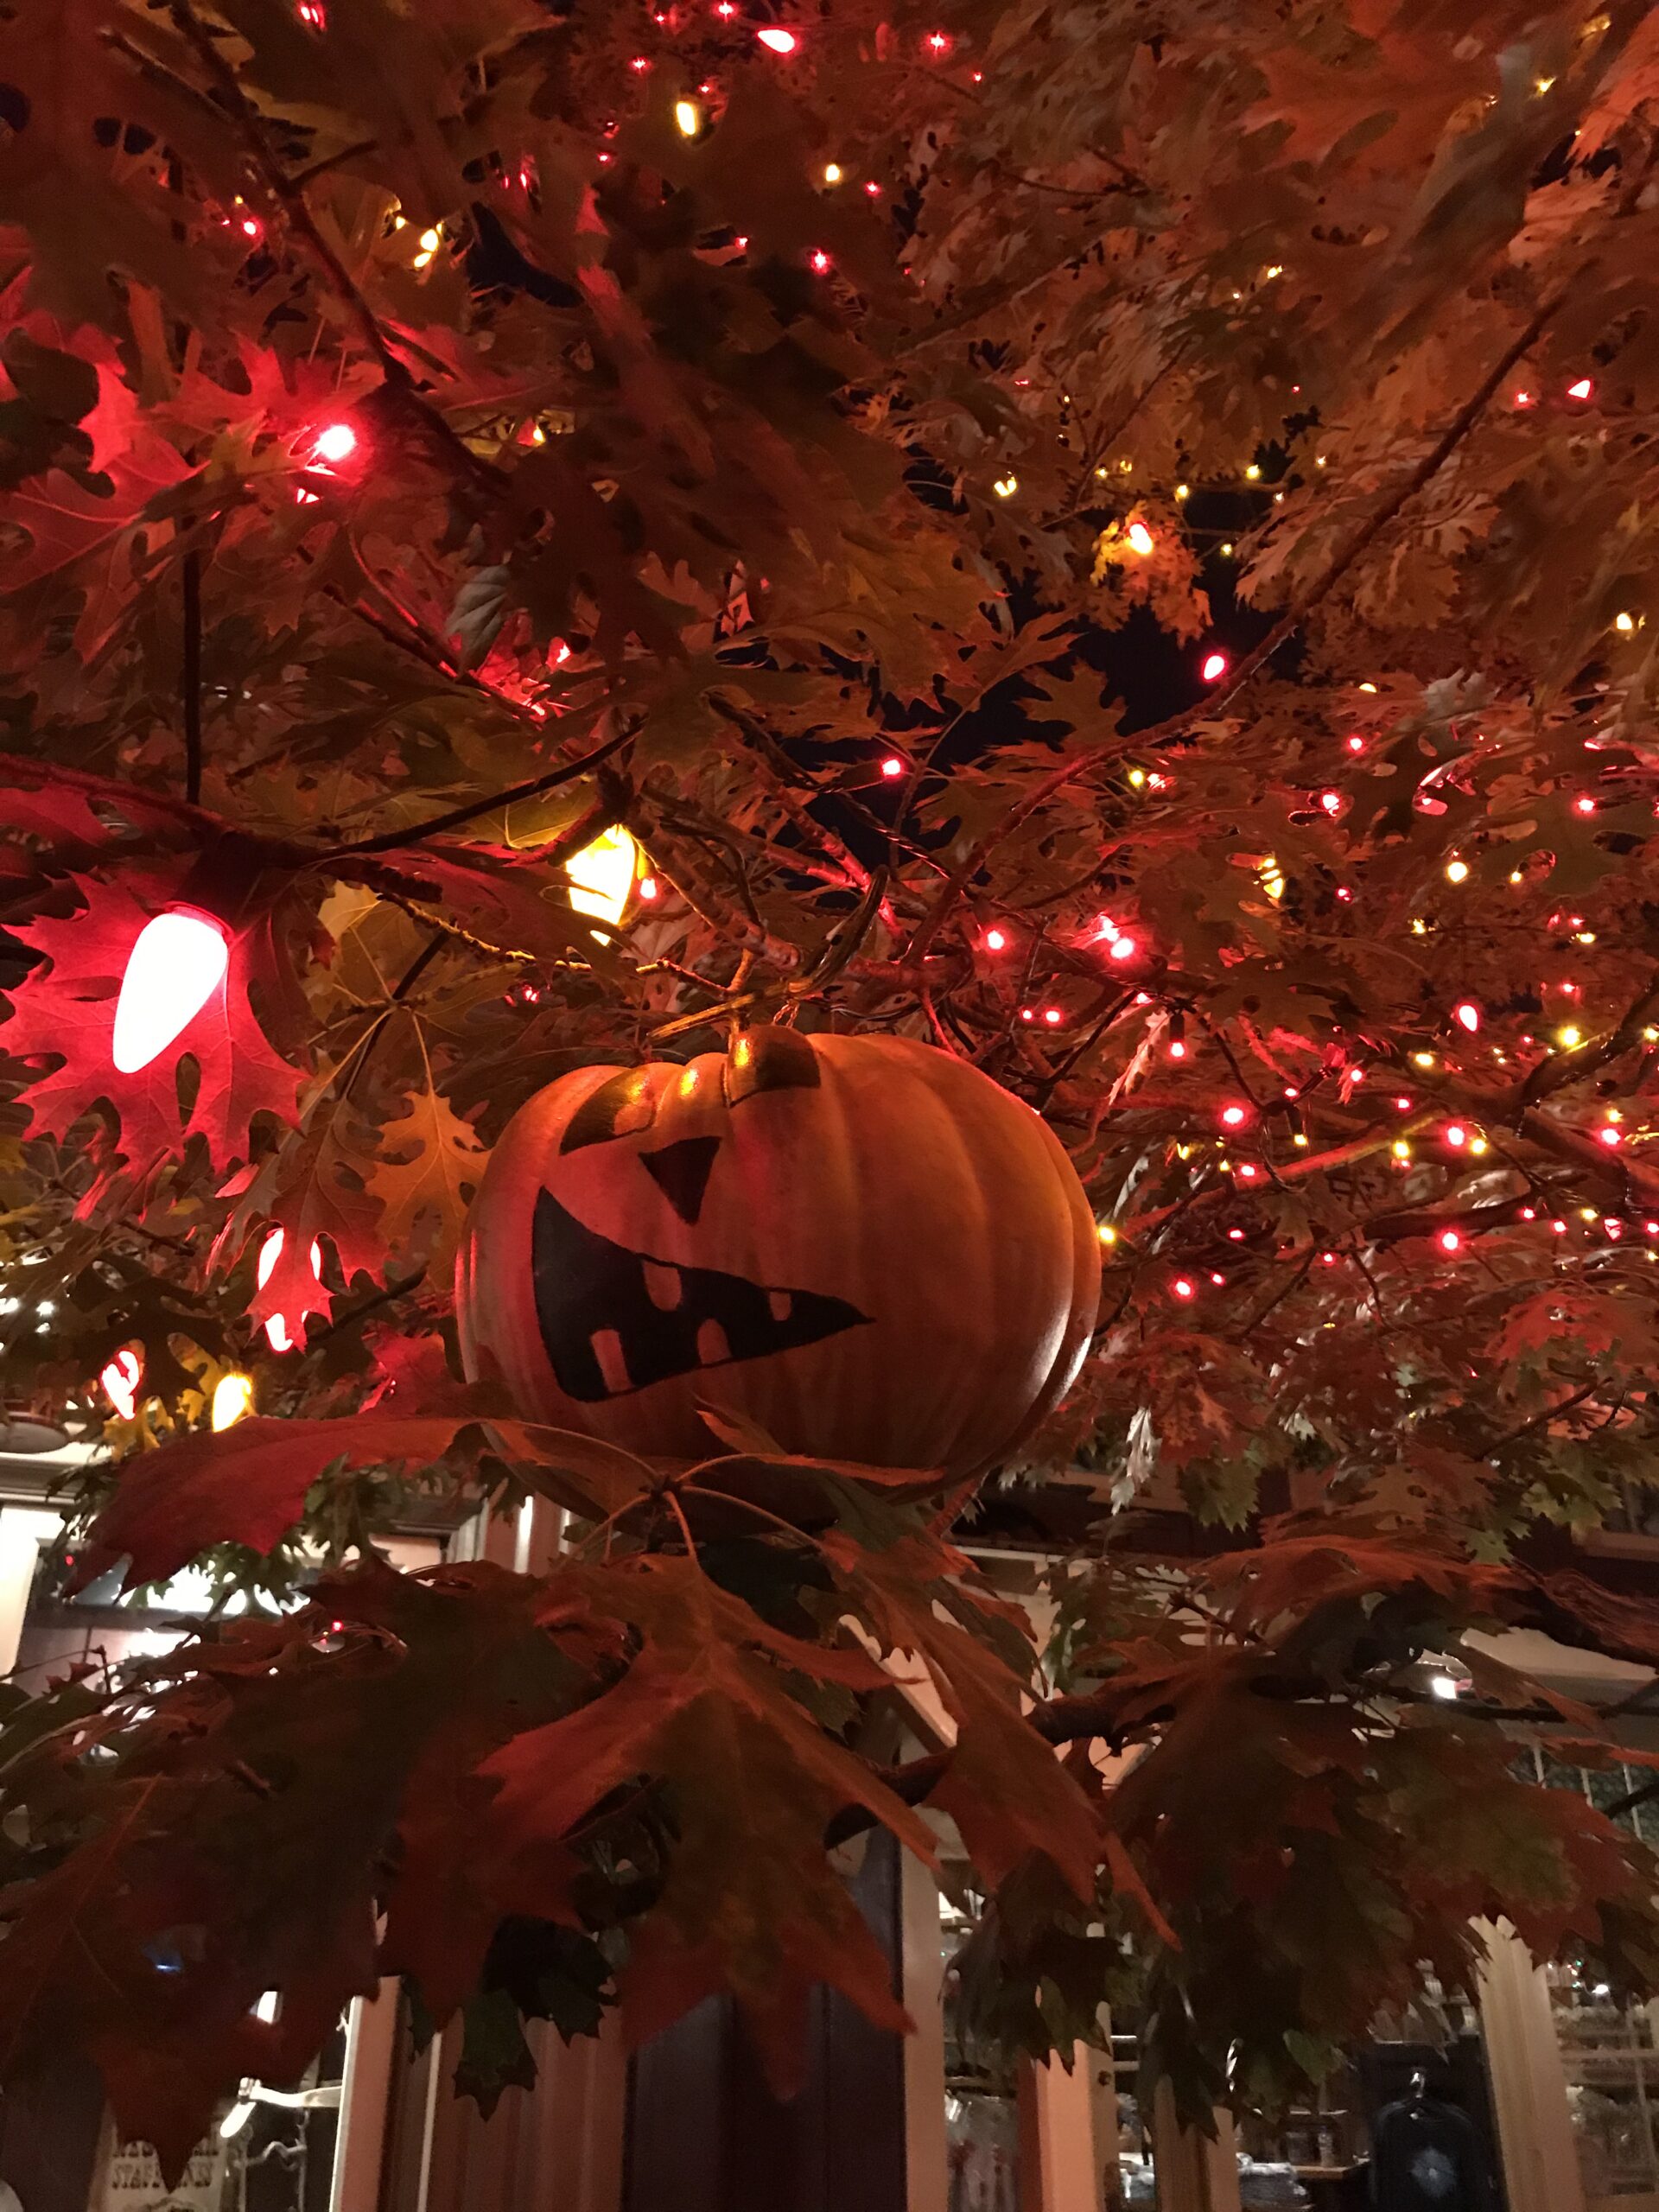 pumpkin in a tree decorated